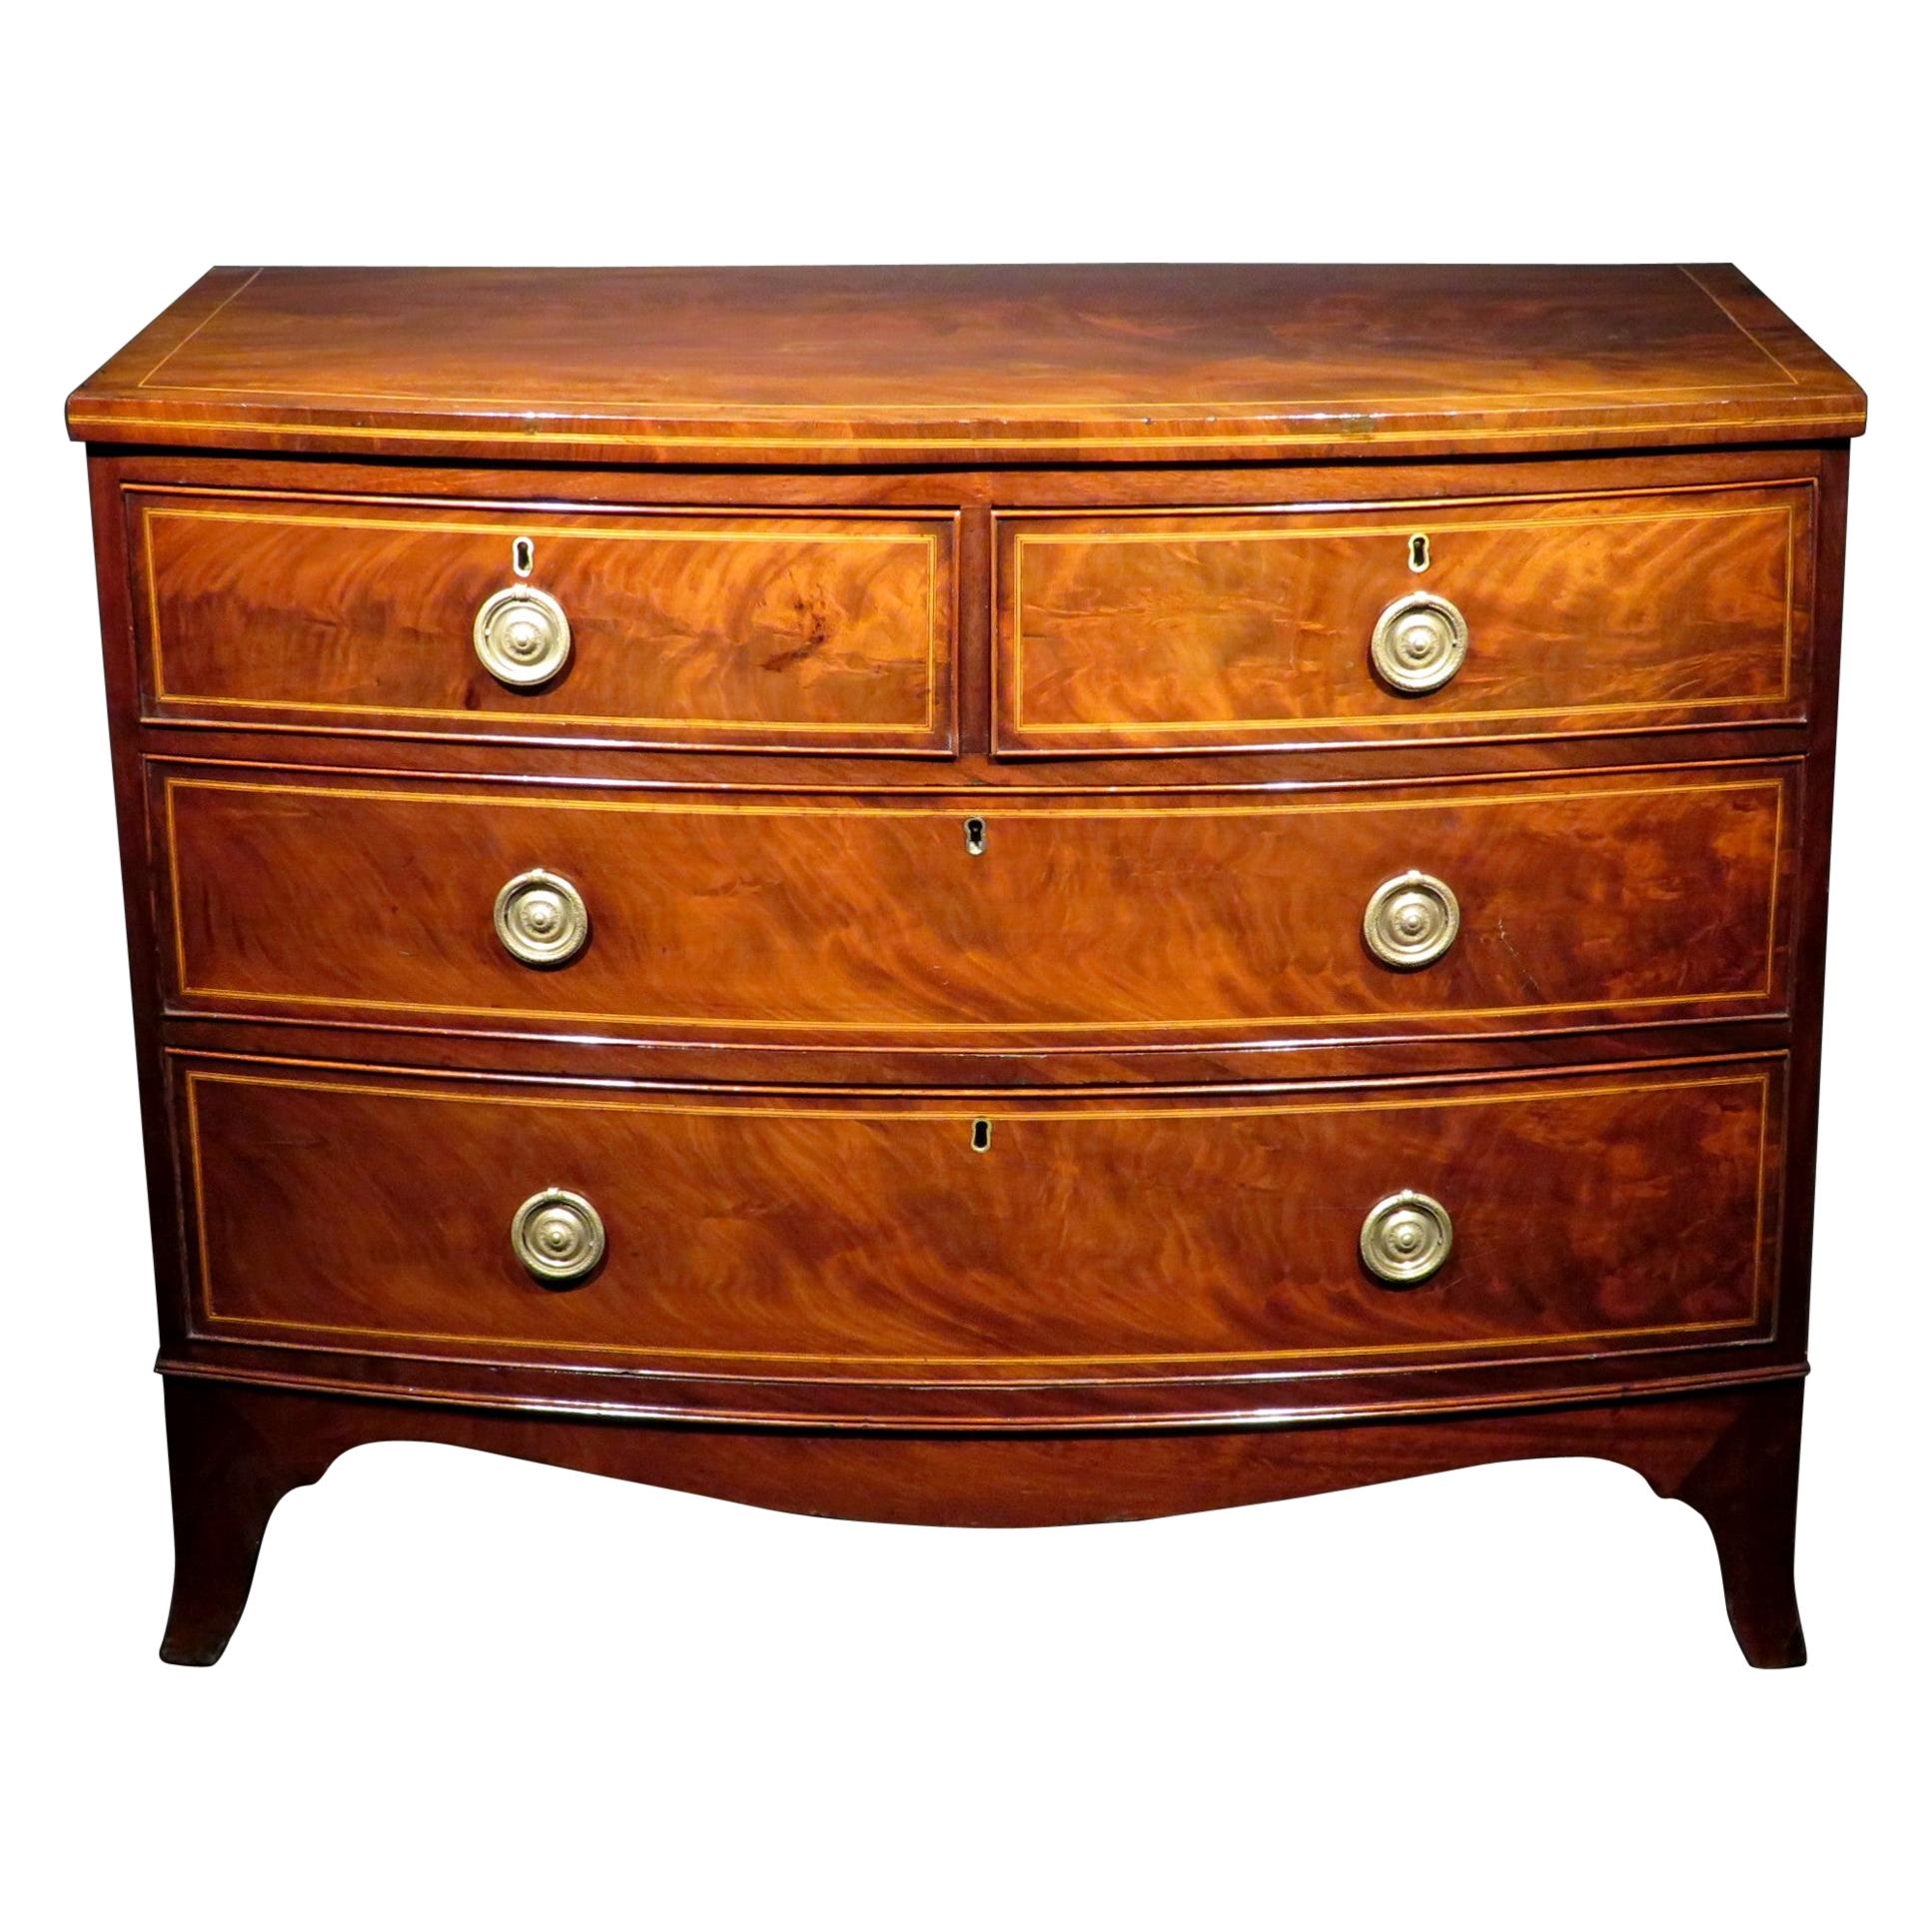 George III Inlaid Mahogany Bow Fronted Chest of Drawers, England Circa 1810